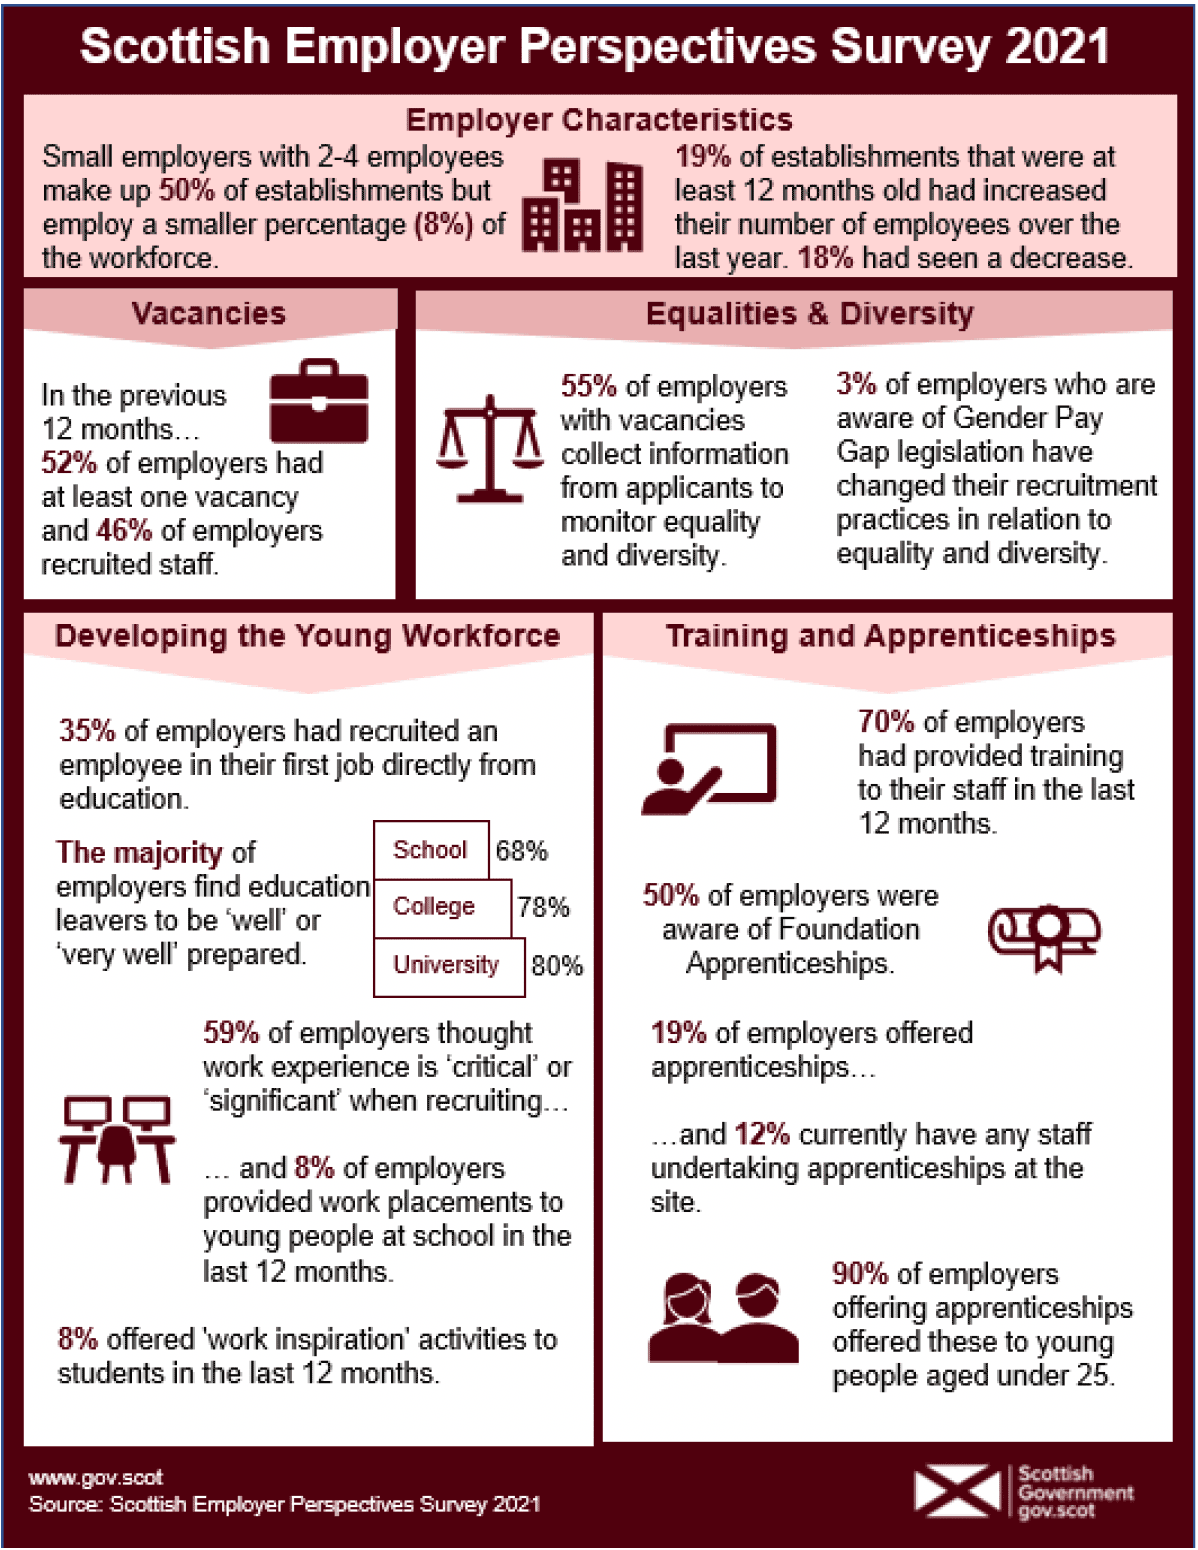 Infographic summarising key findings from the Scottish Employer Perspectives Survey 2021